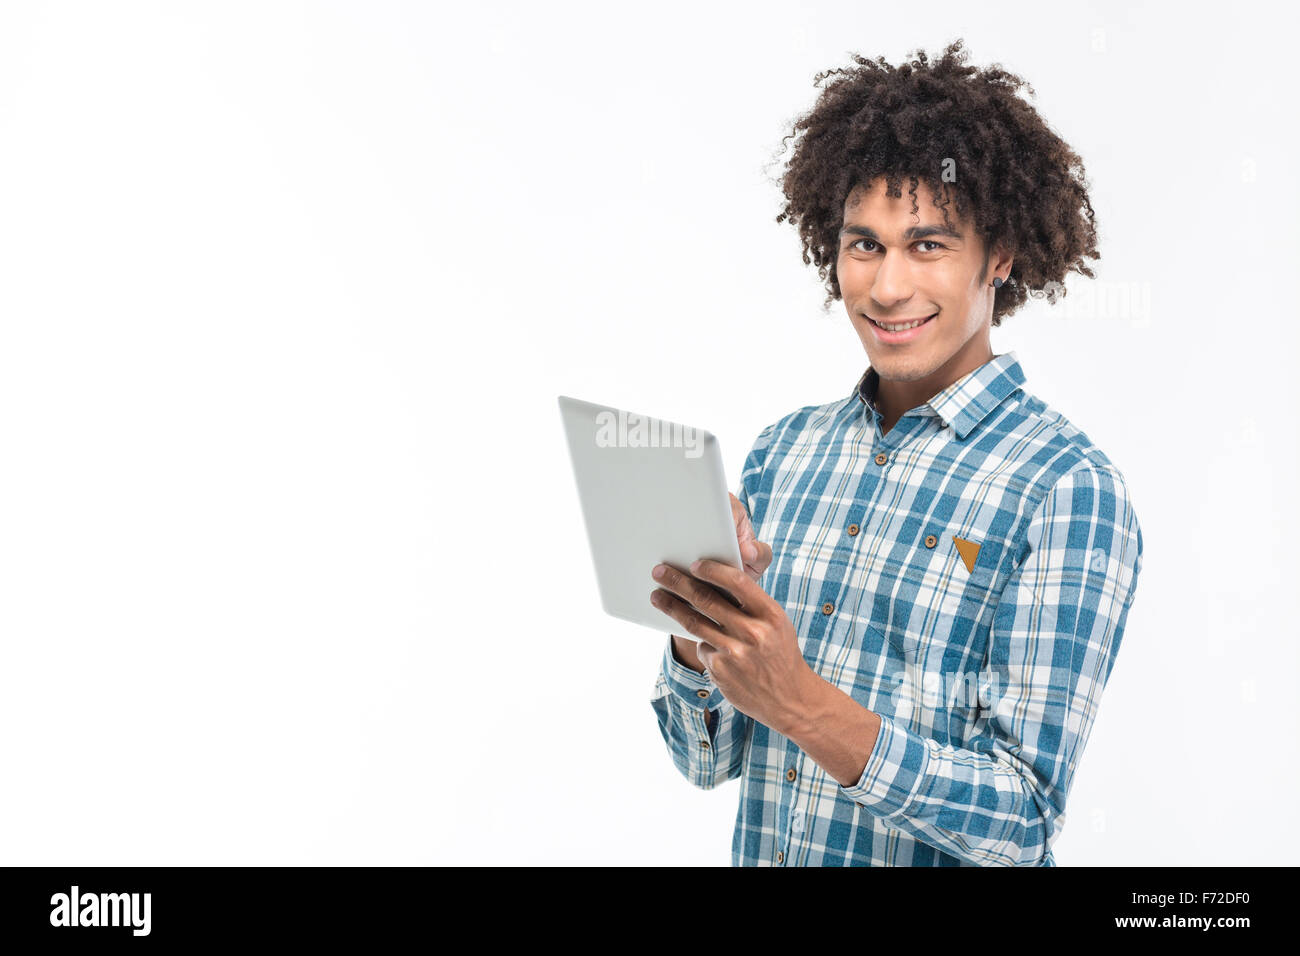 Portrait of a smiling afro american man using tablet computer isolated on a white background and looking at camera Stock Photo